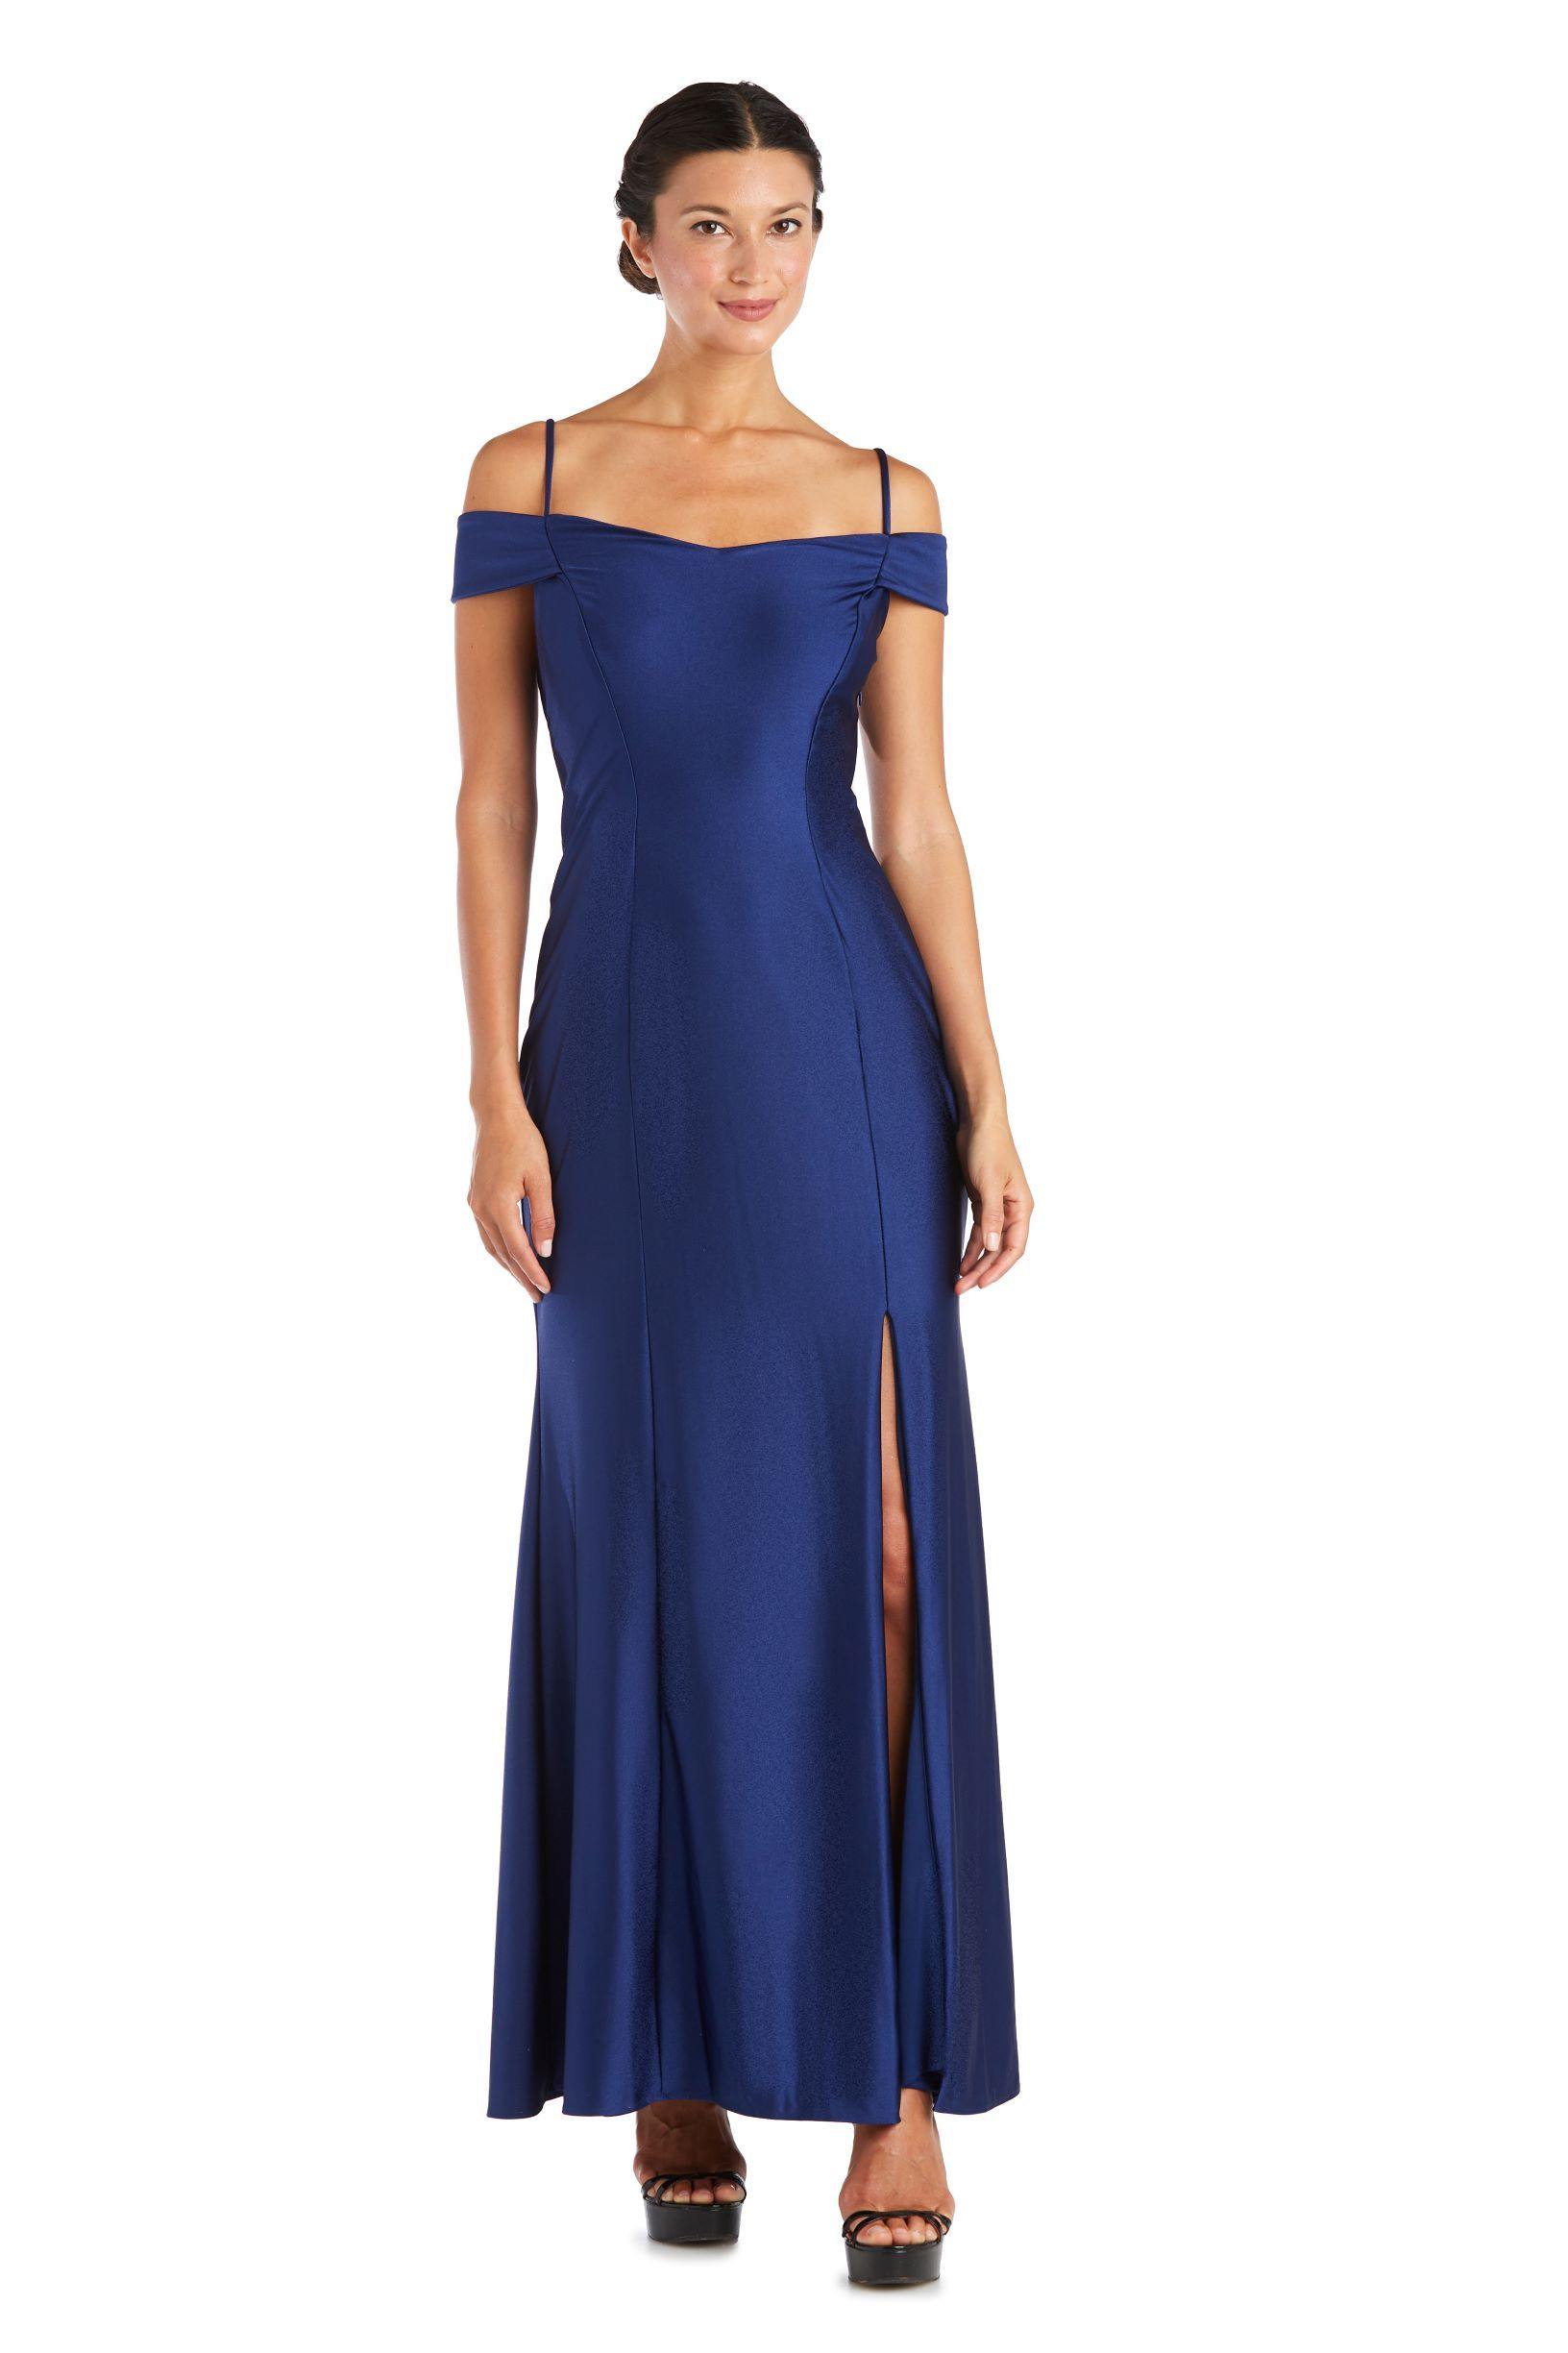 Twilight Nightway Long Formal Dress 21920 for $89.99 – The Dress Outlet